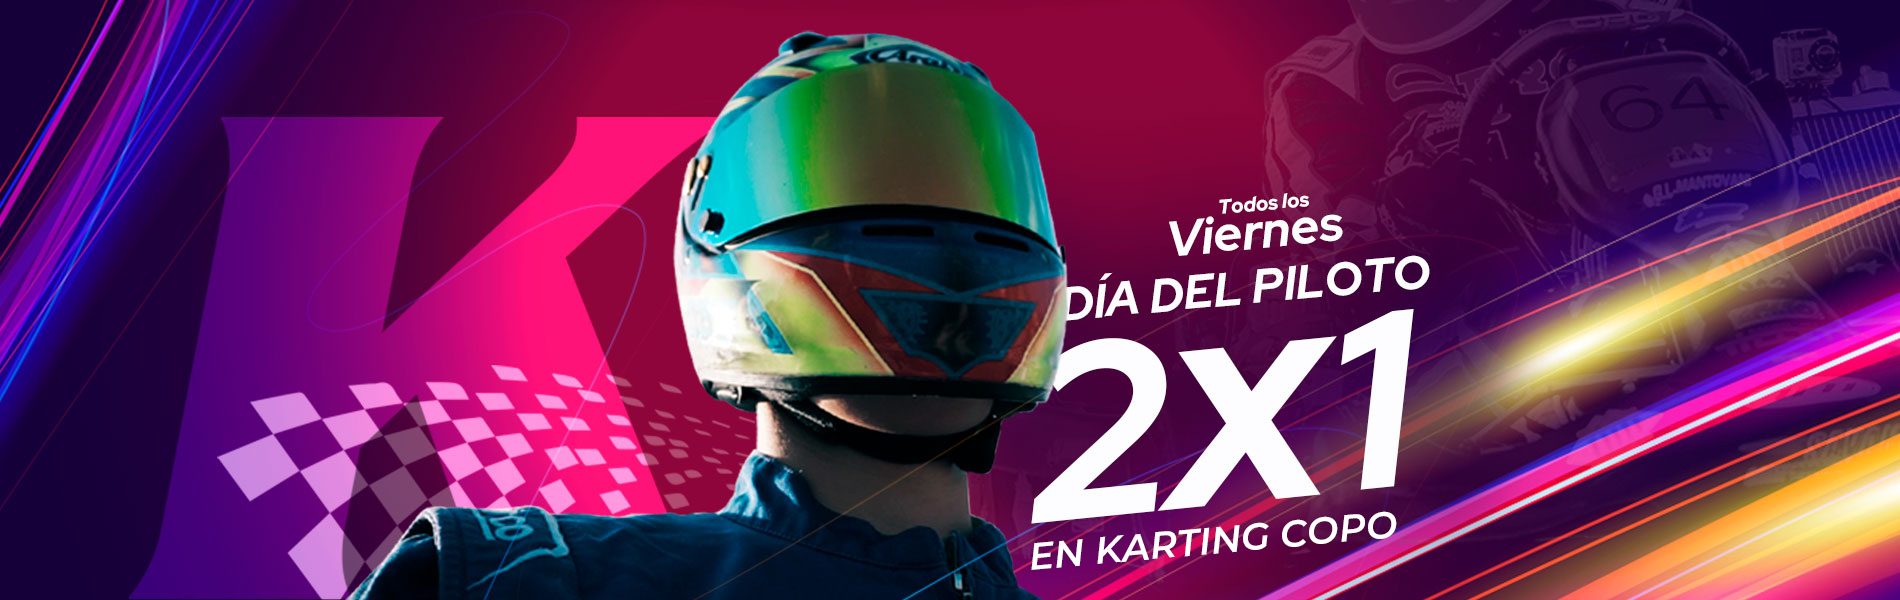 carrusell-2X1-karting-copo